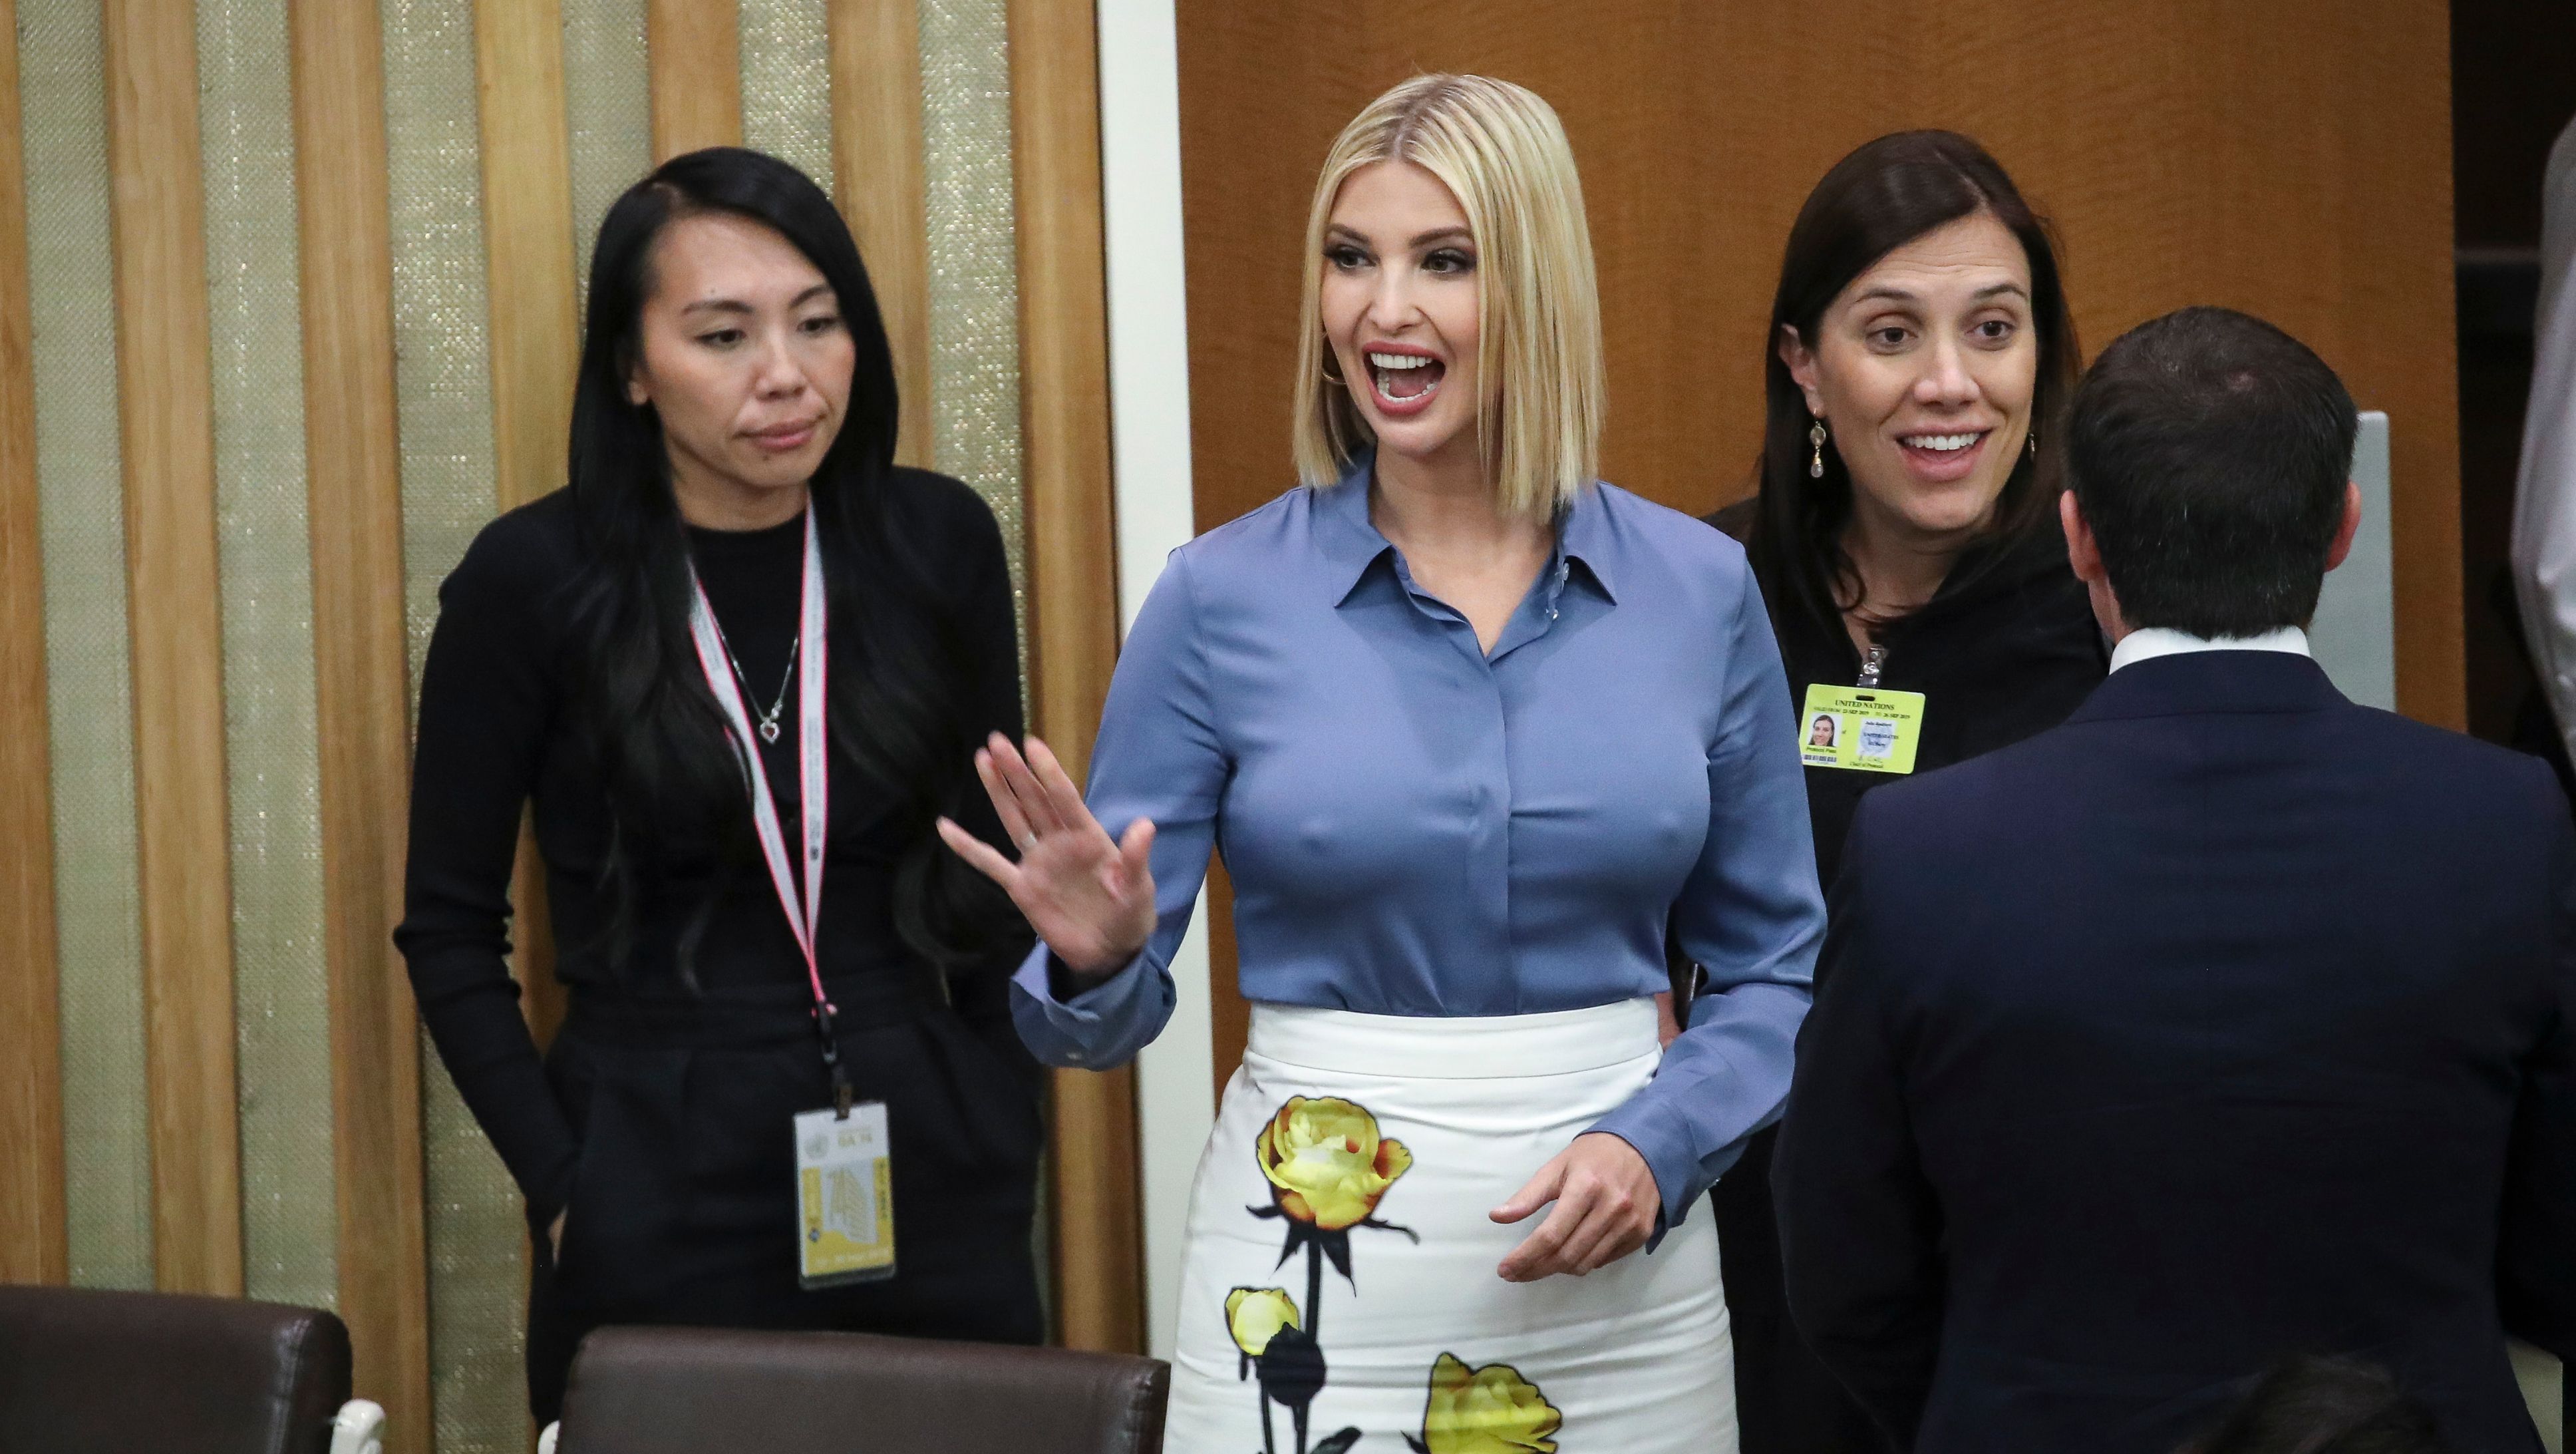 Ivanka Trump's Wardrobe Malfunction at the UN Gets Chilly ...